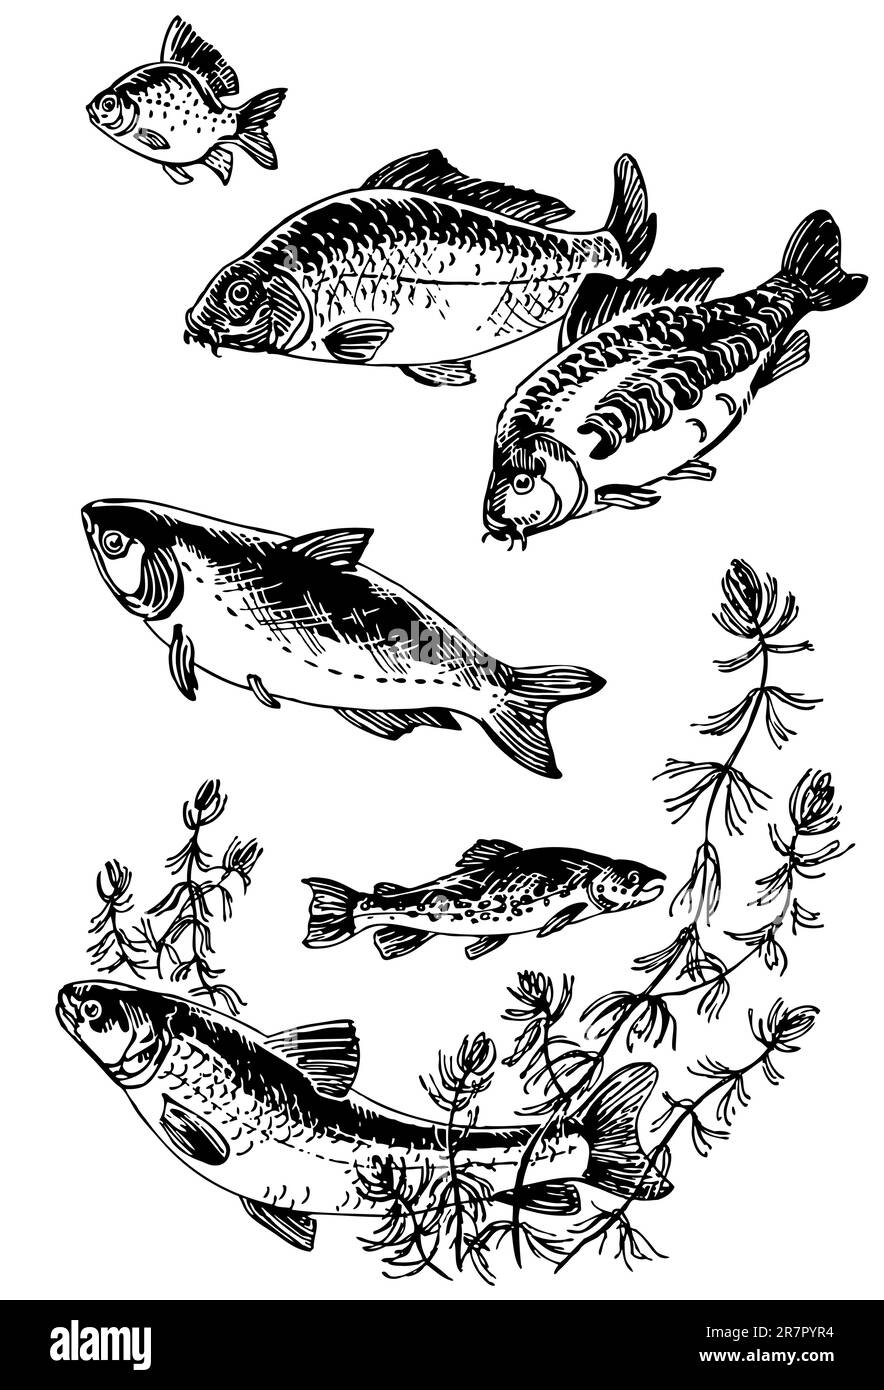 Fishes in the water Stock Vector